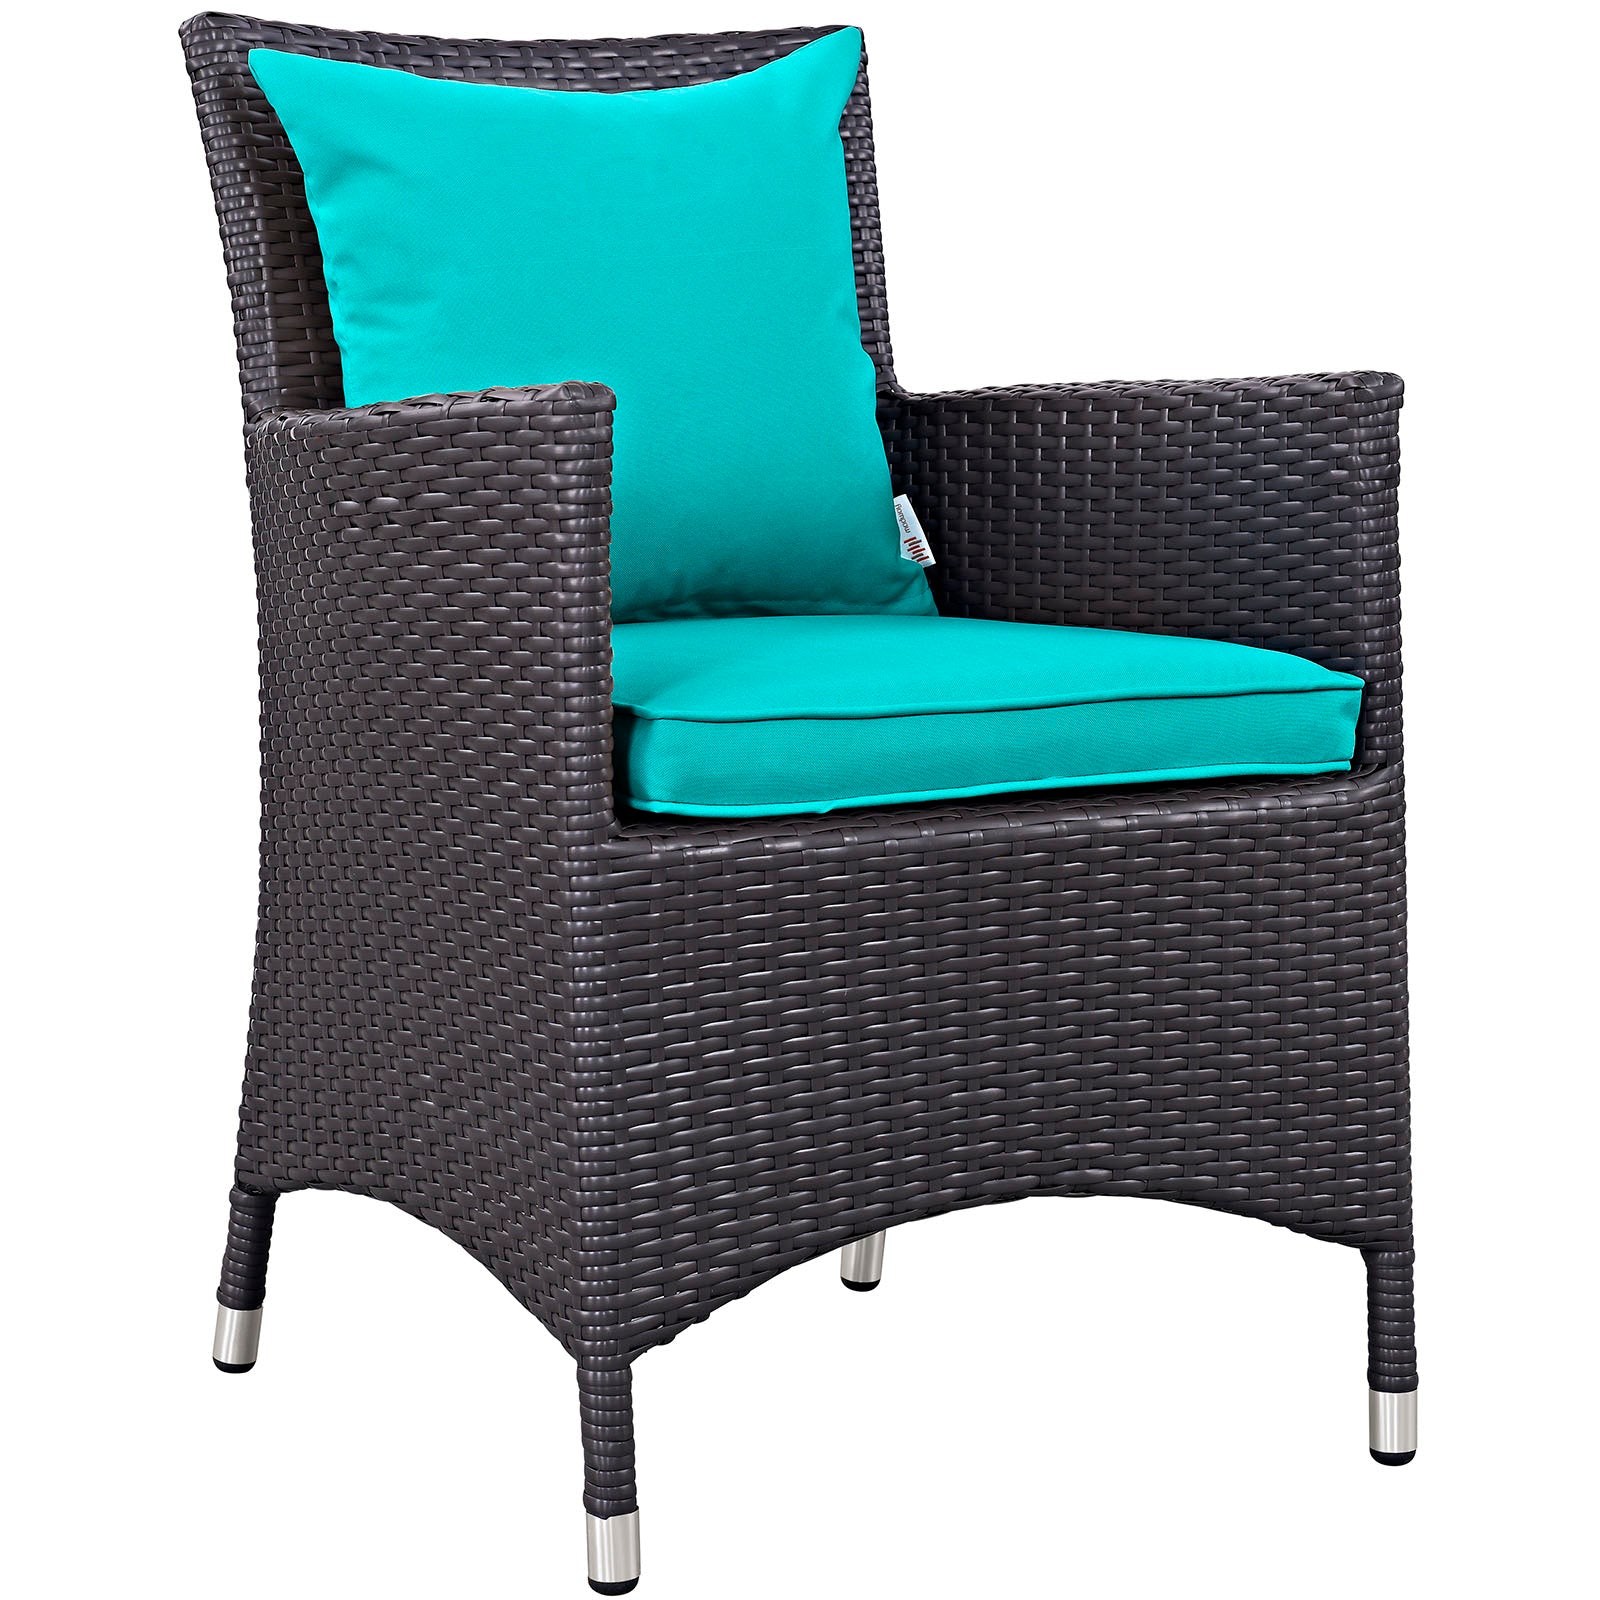 Modway Outdoor Dining Sets - Convene 7 Piece Outdoor Patio Dining Set Espresso Turquoise